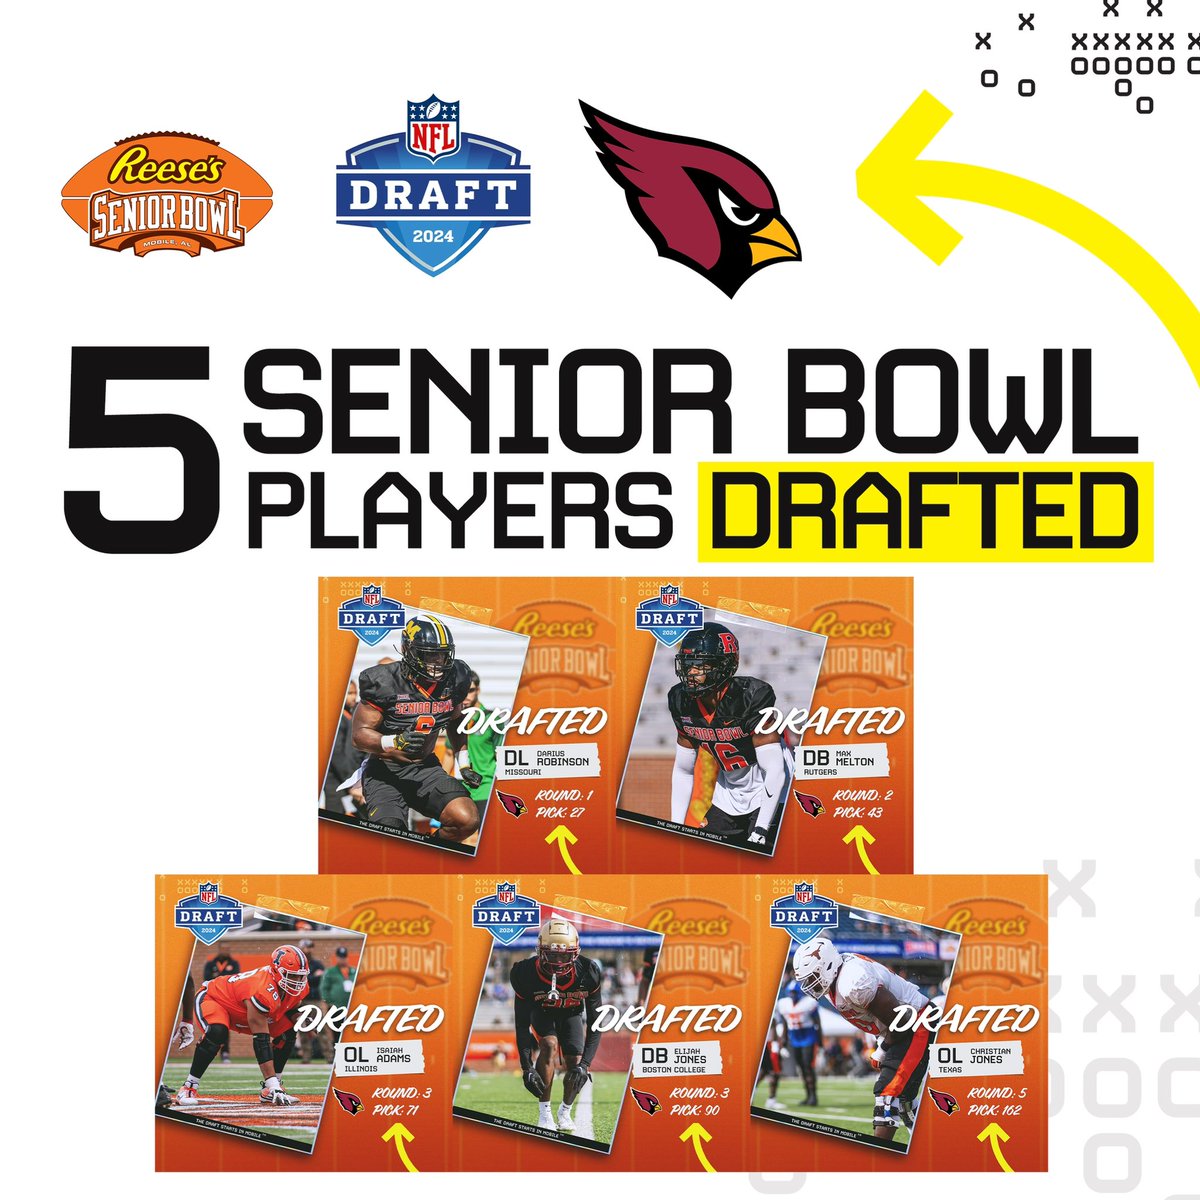 Here's what #BirdGang fans can expect from their @seniorbowl rookies: 🌵DE Darius Robinson (Round 1, Pick 27)- Among biggest risers in pre-draft process. Voted 'Overall Practice Player of Week' in Mobile by poll of scouts/execs. Big jump this fall from 2022 tape. Versatile…